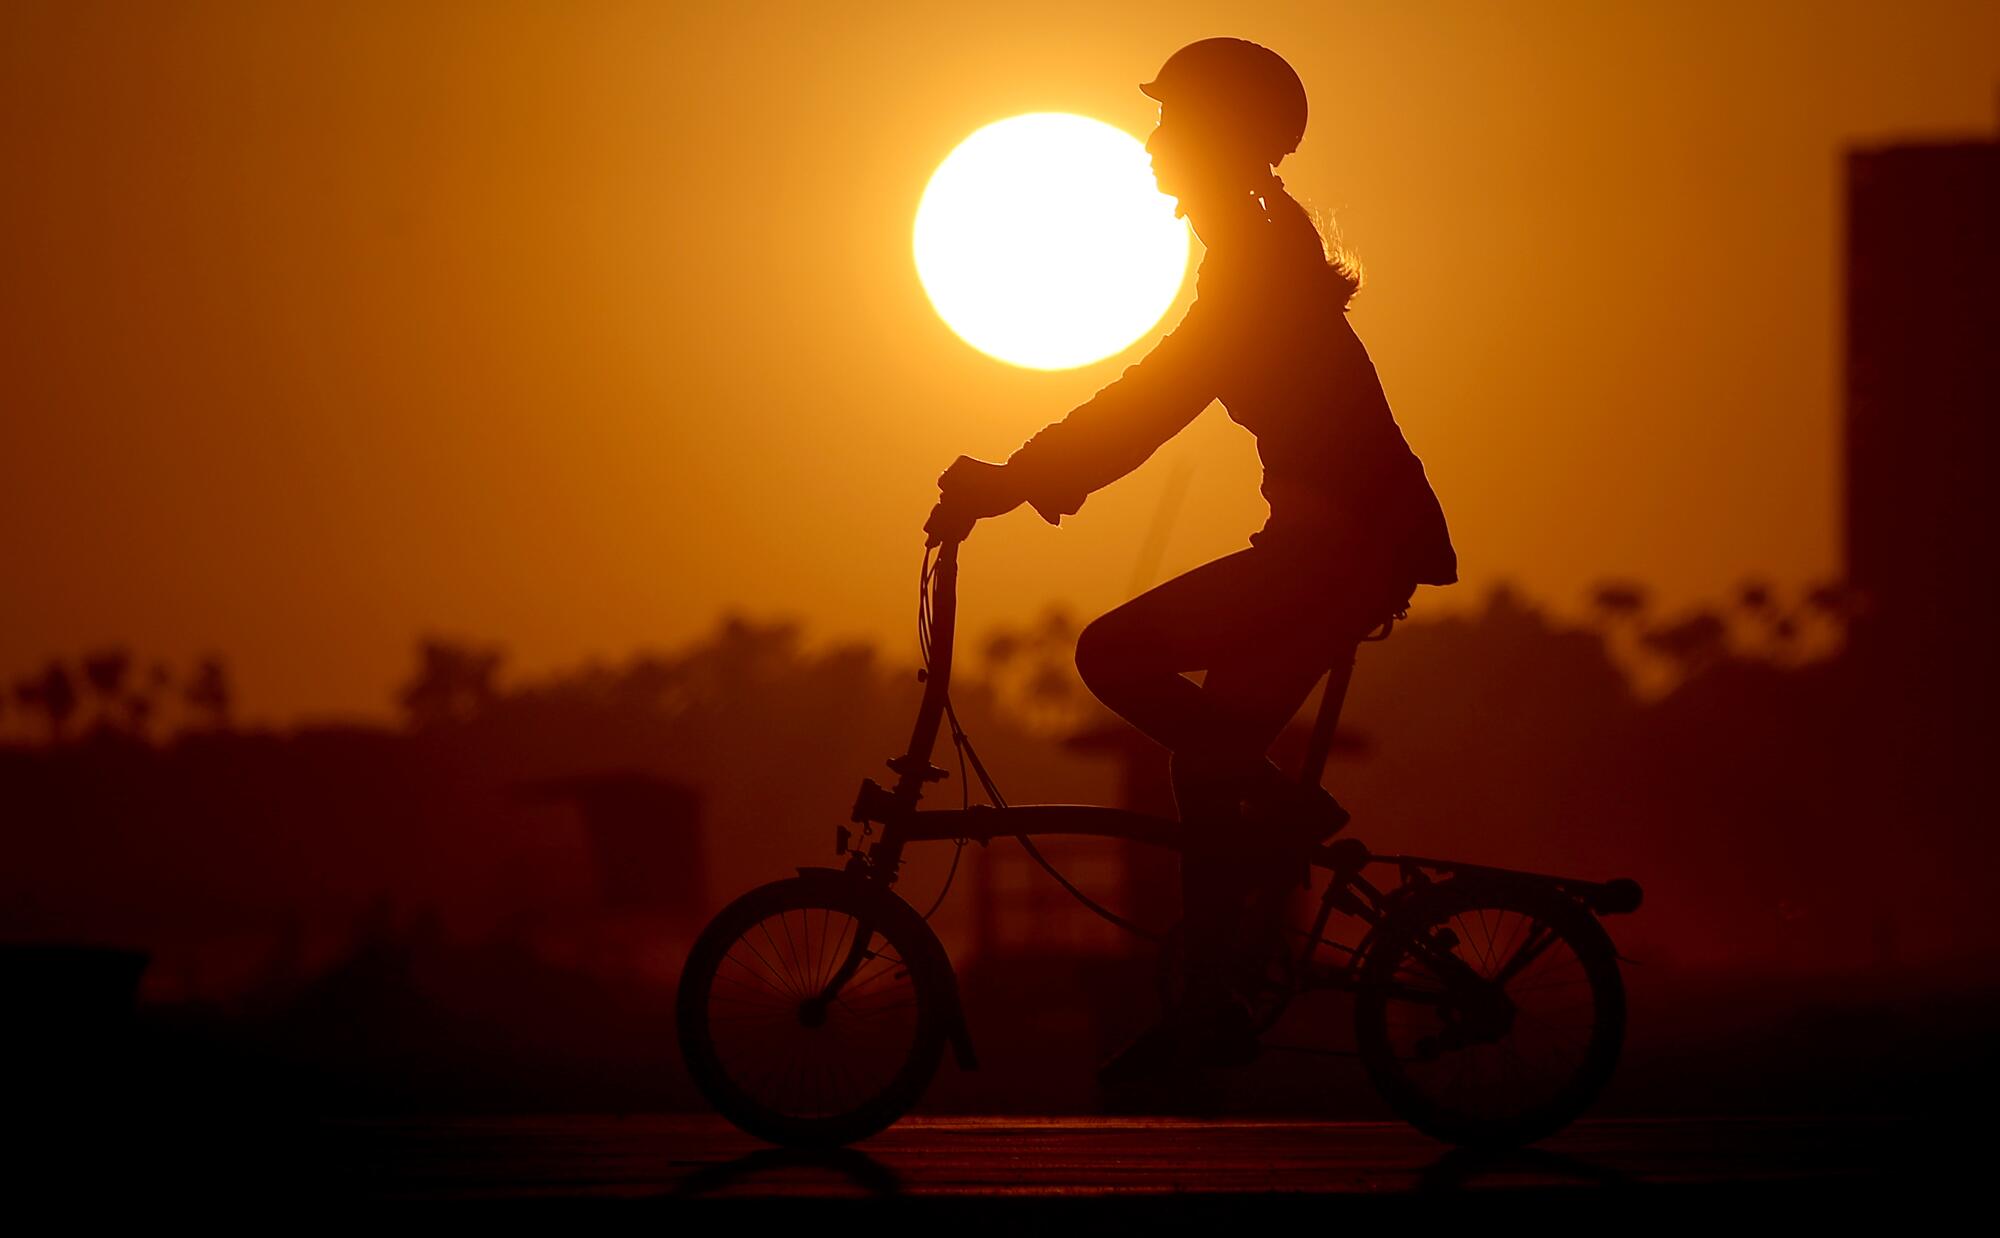 A bike rider is silhouetted by the sun and an orange sky.